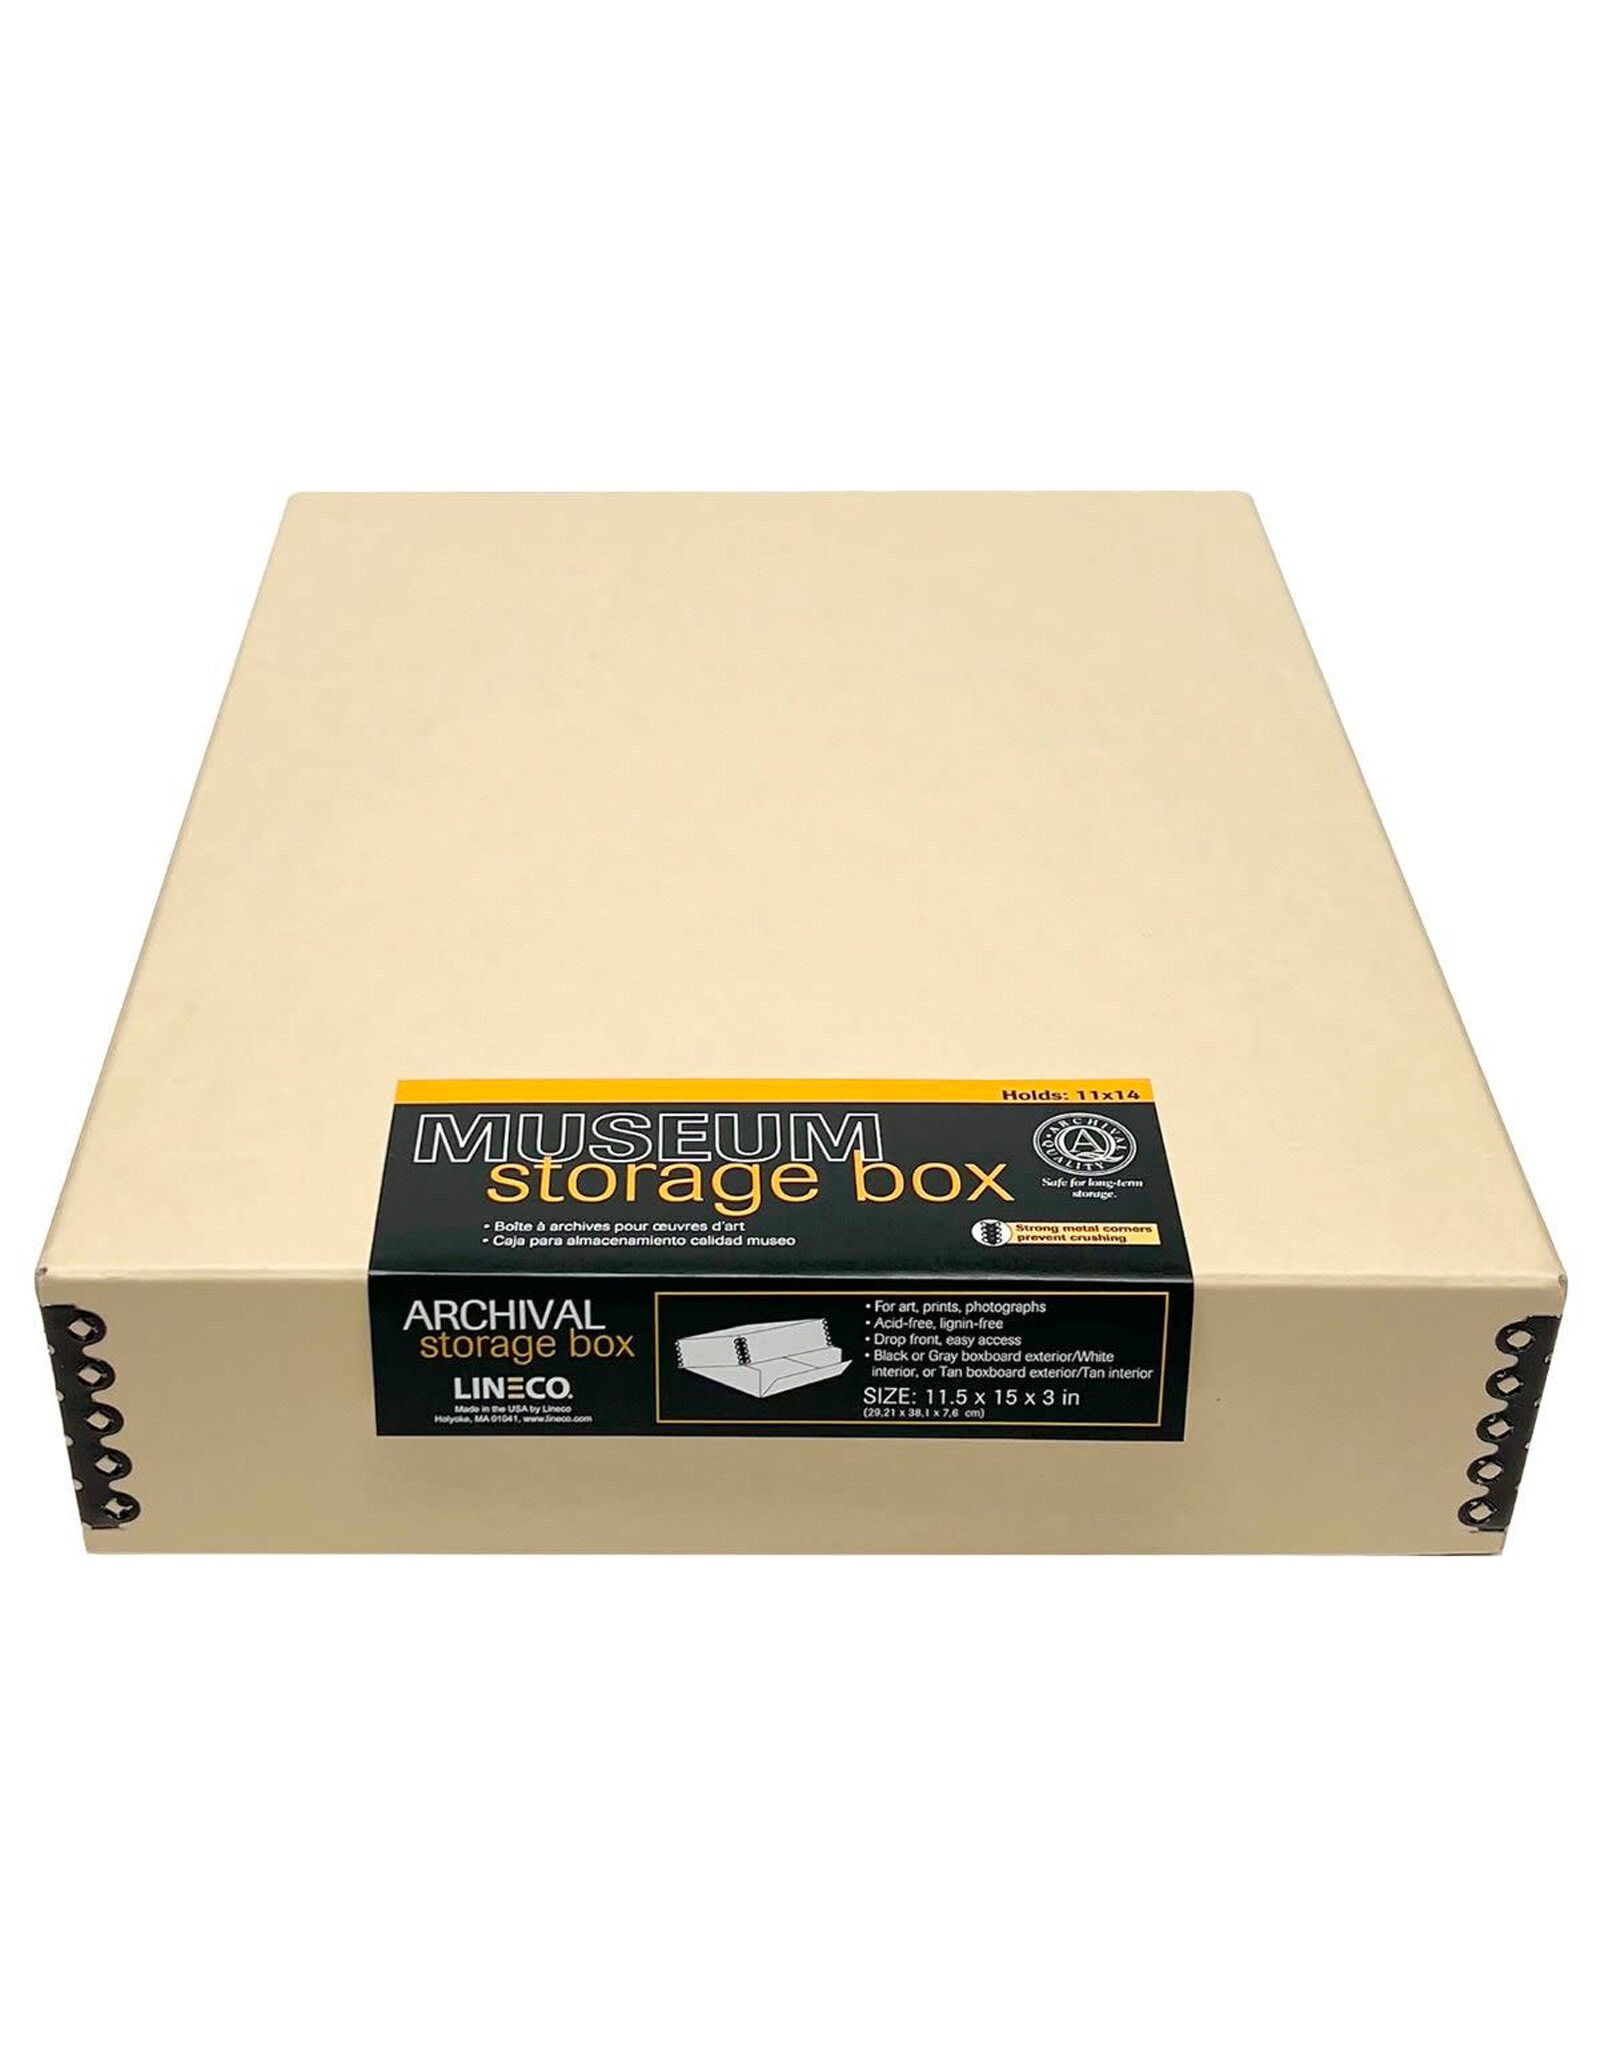 Lineco Museum Storage Box, Tan, 11¾” x 15¼” x 3 - The Art Store/Commercial  Art Supply